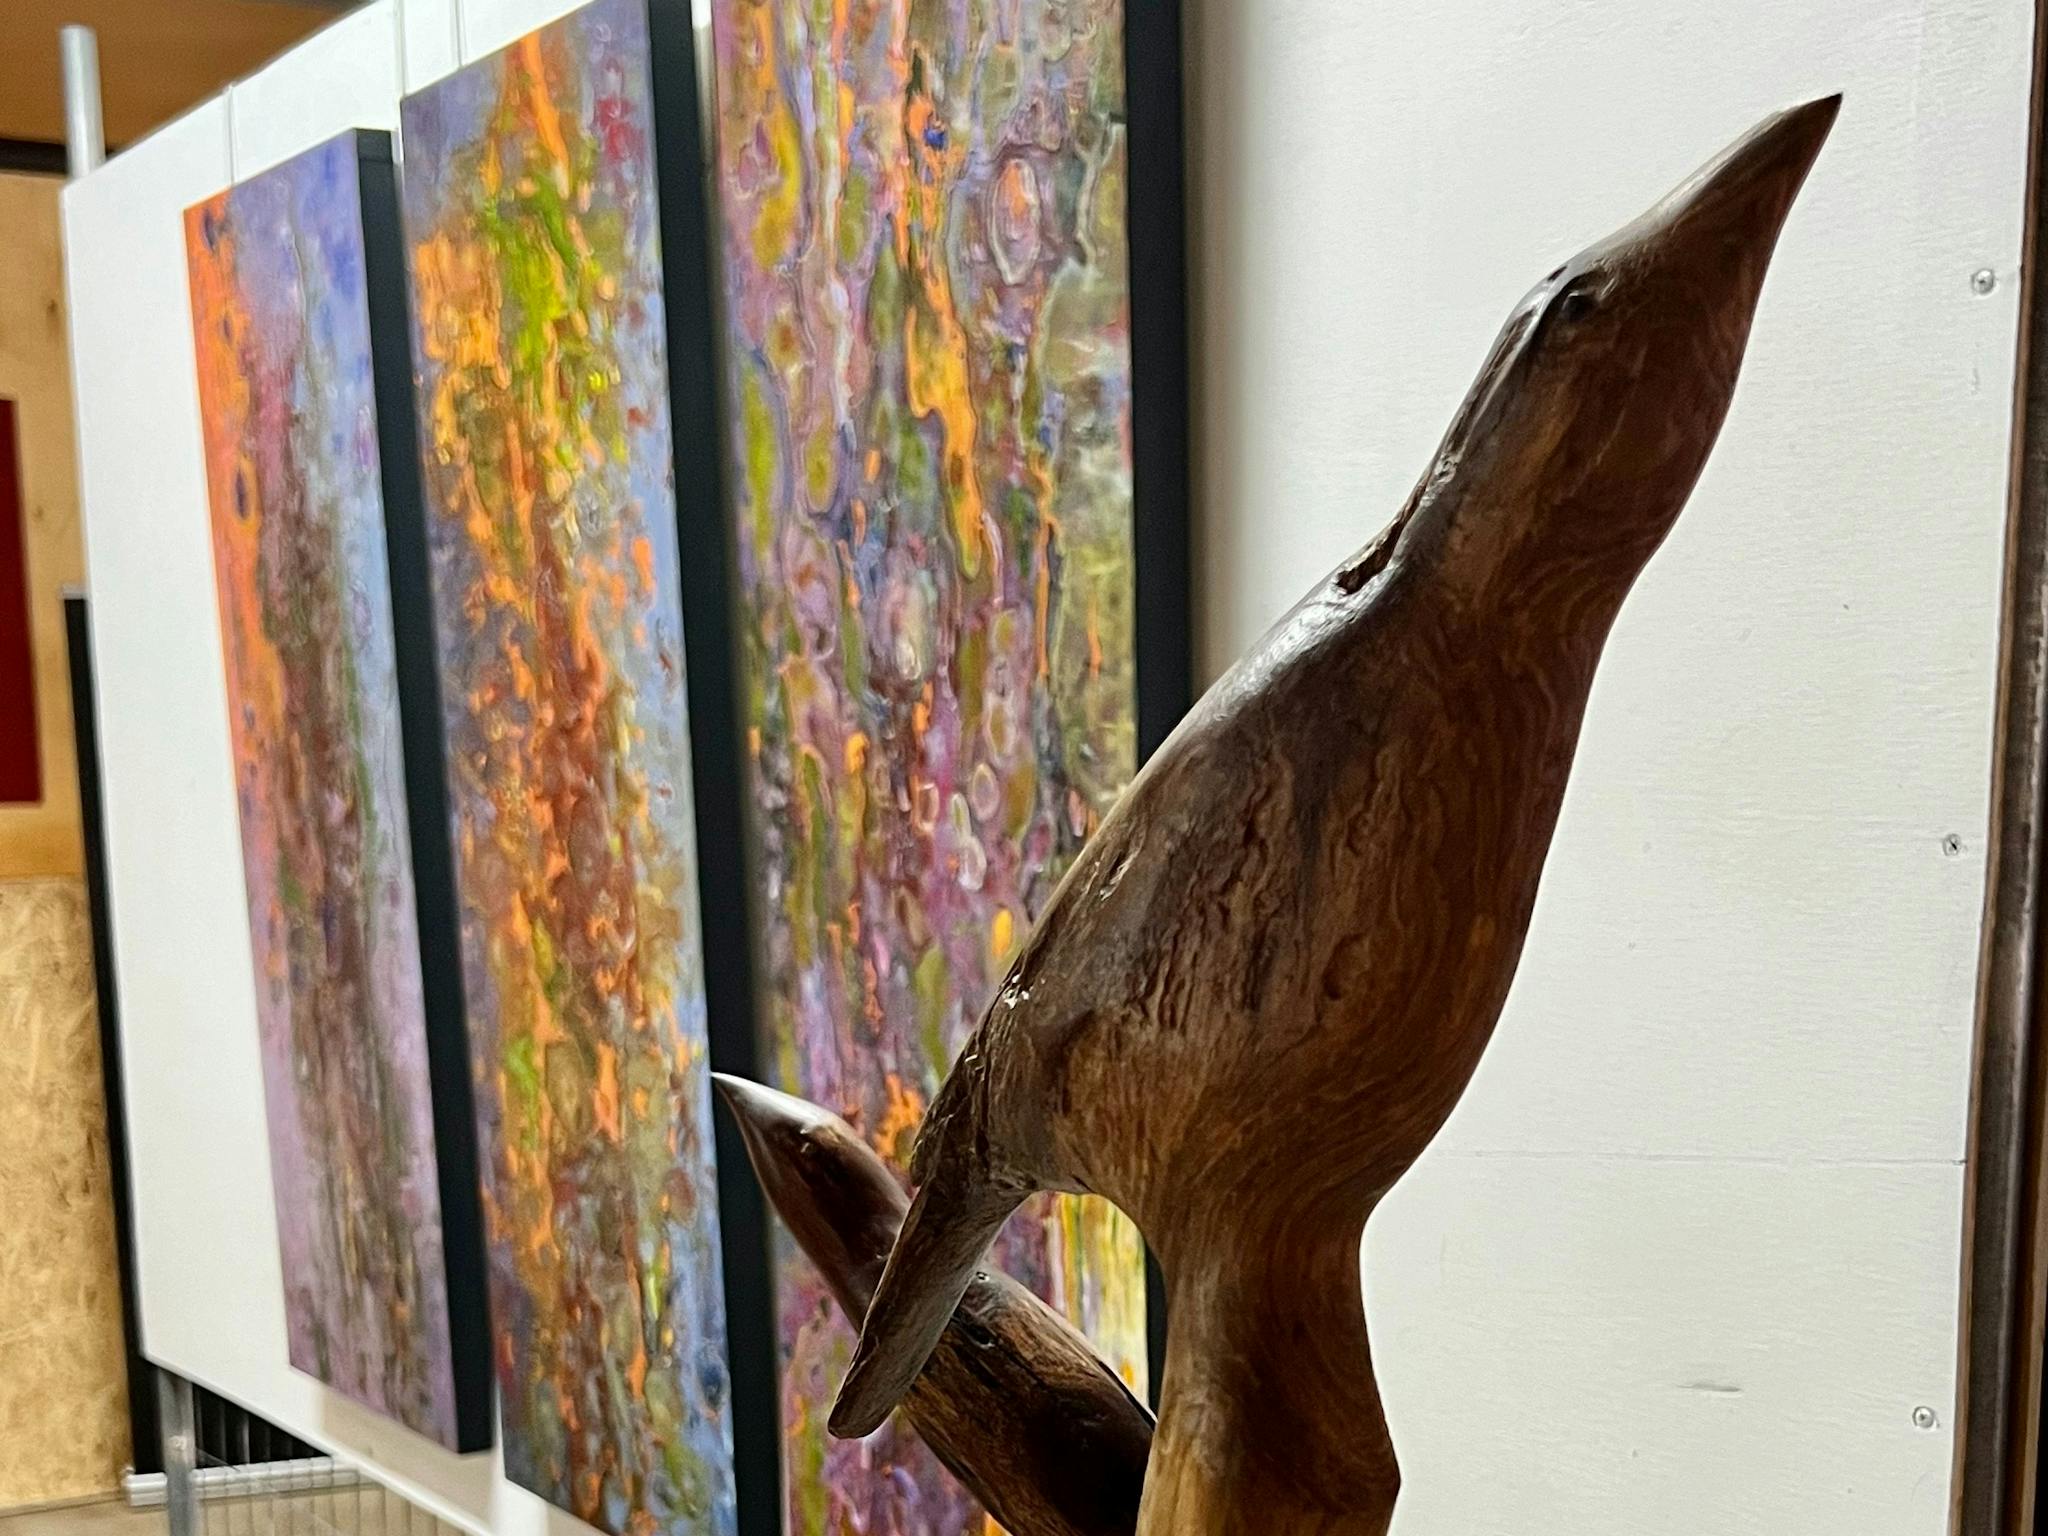 Hand carved wooden birds i on stand in front of a nanging triptych of bark paintings